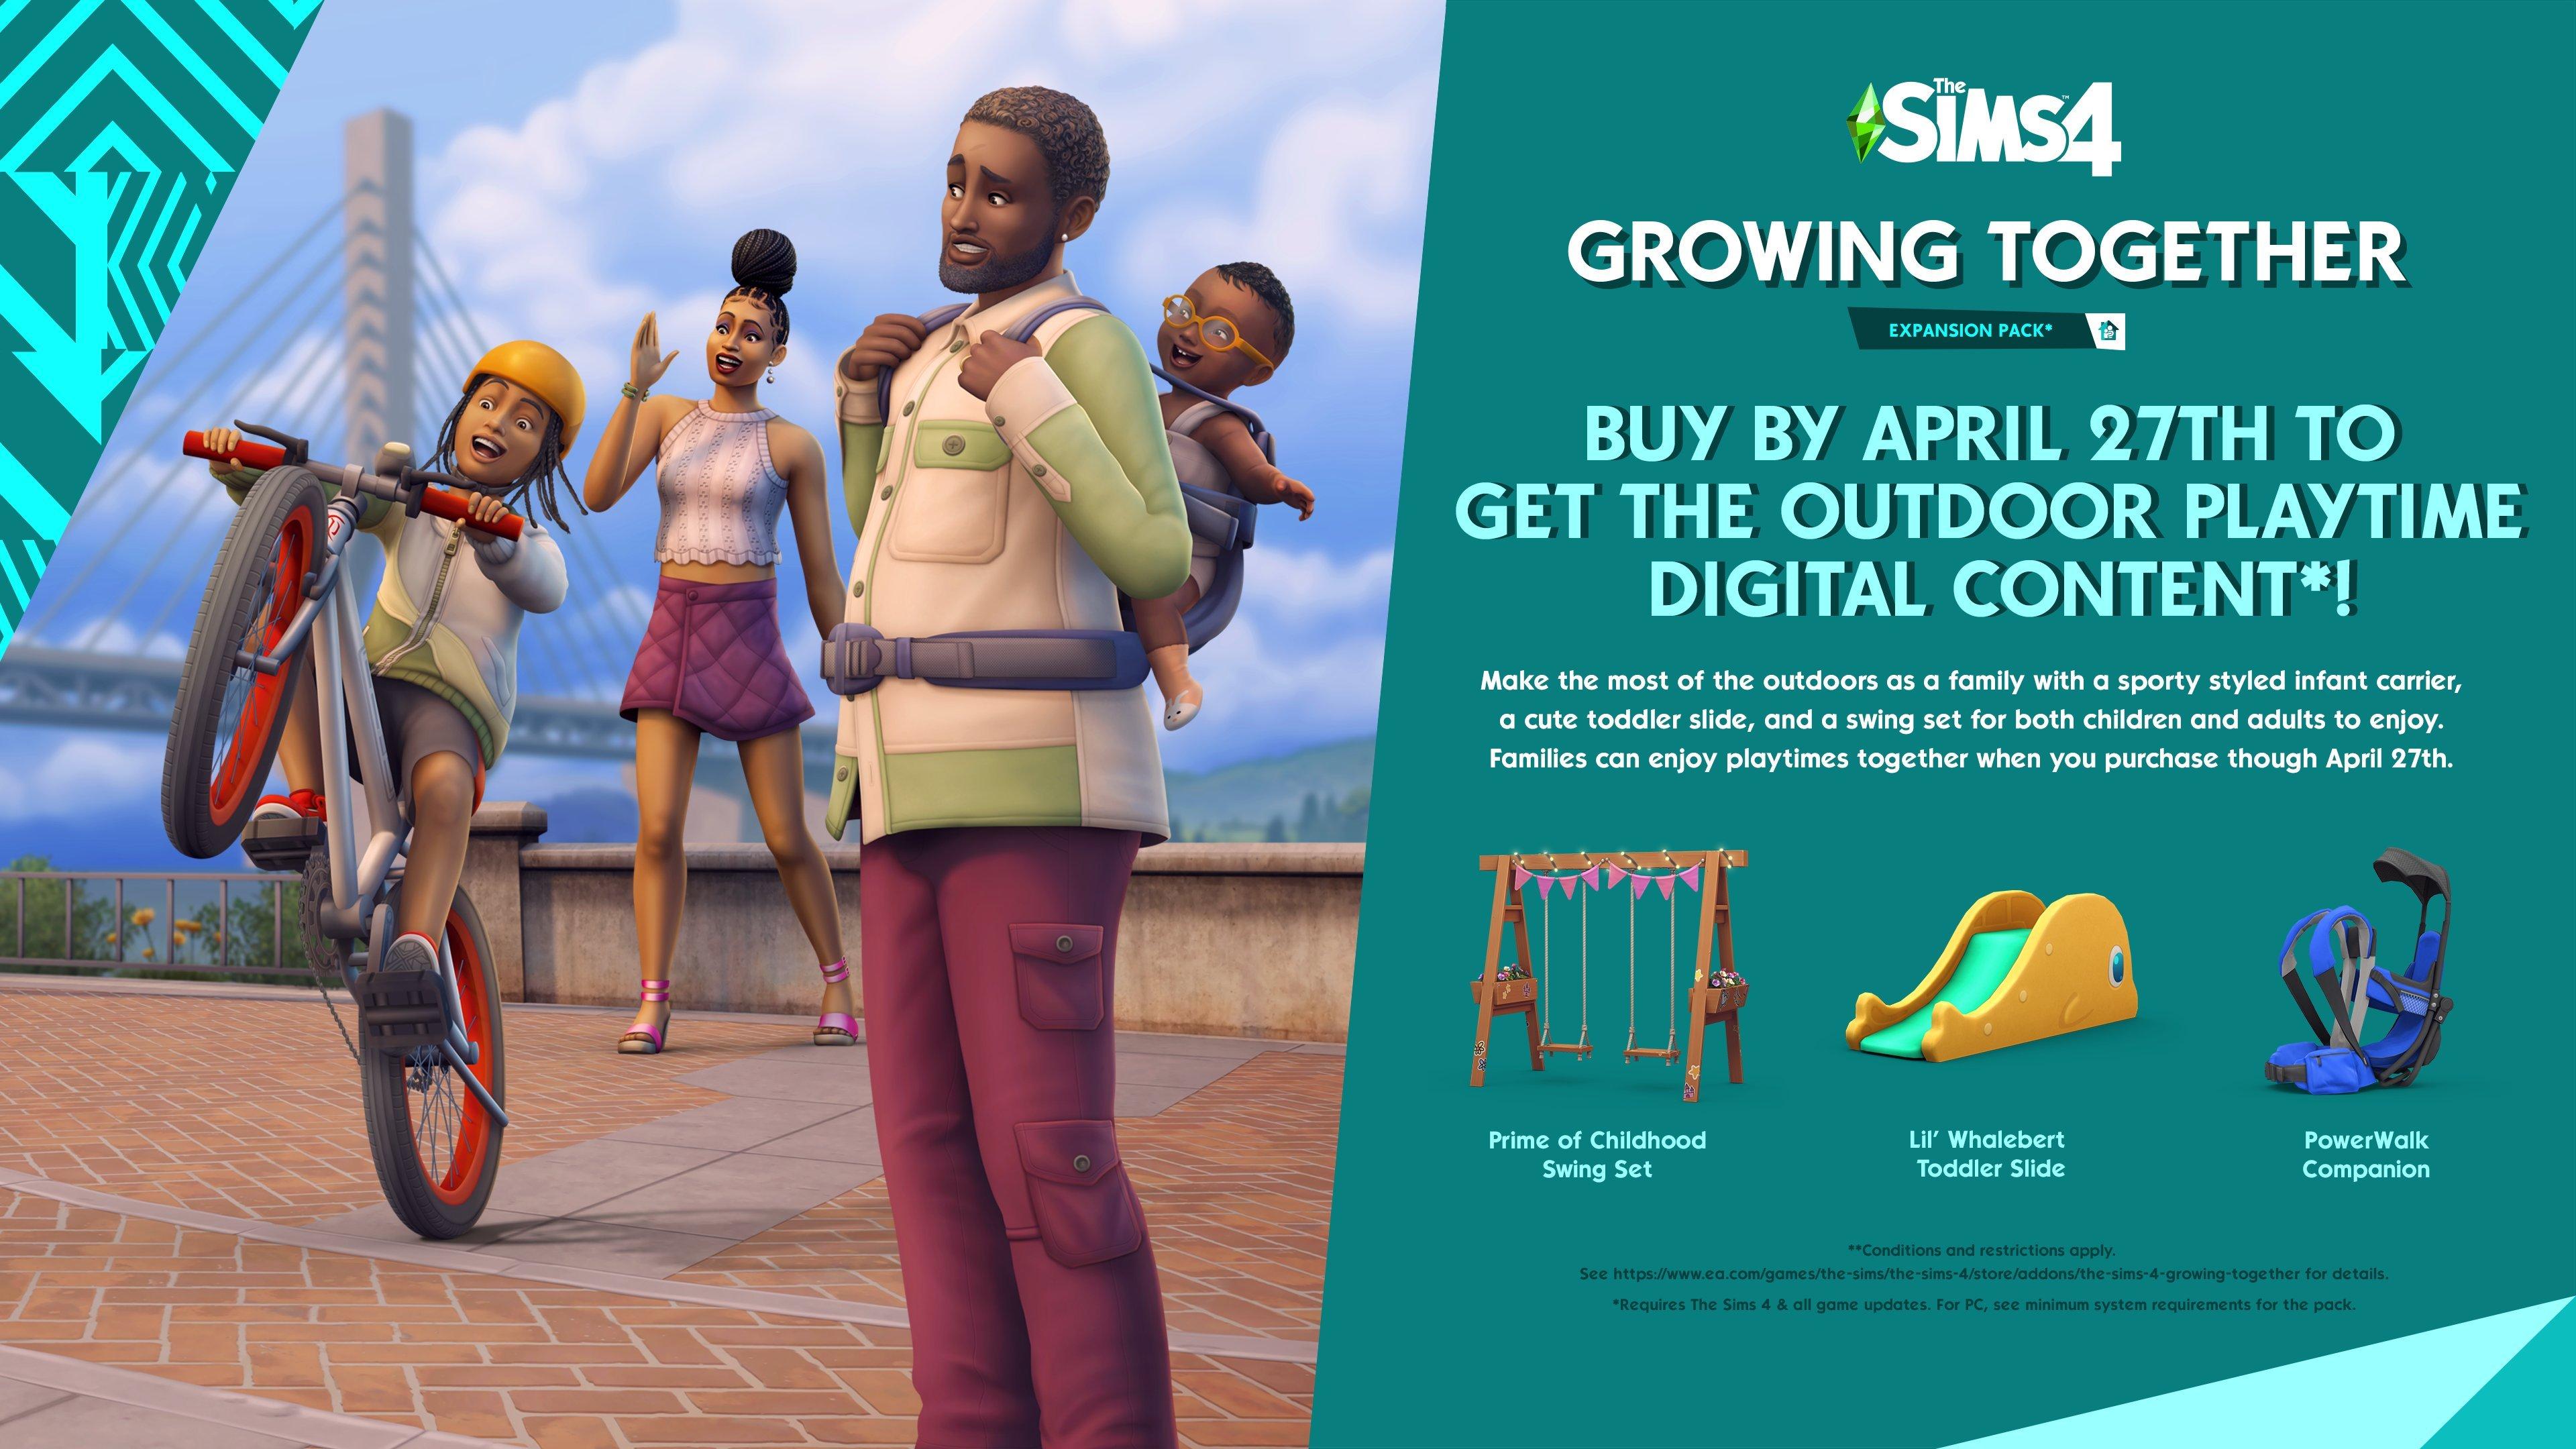 Sims 4 dlc cheap - here's how to save money on Sims 4 expansion packs